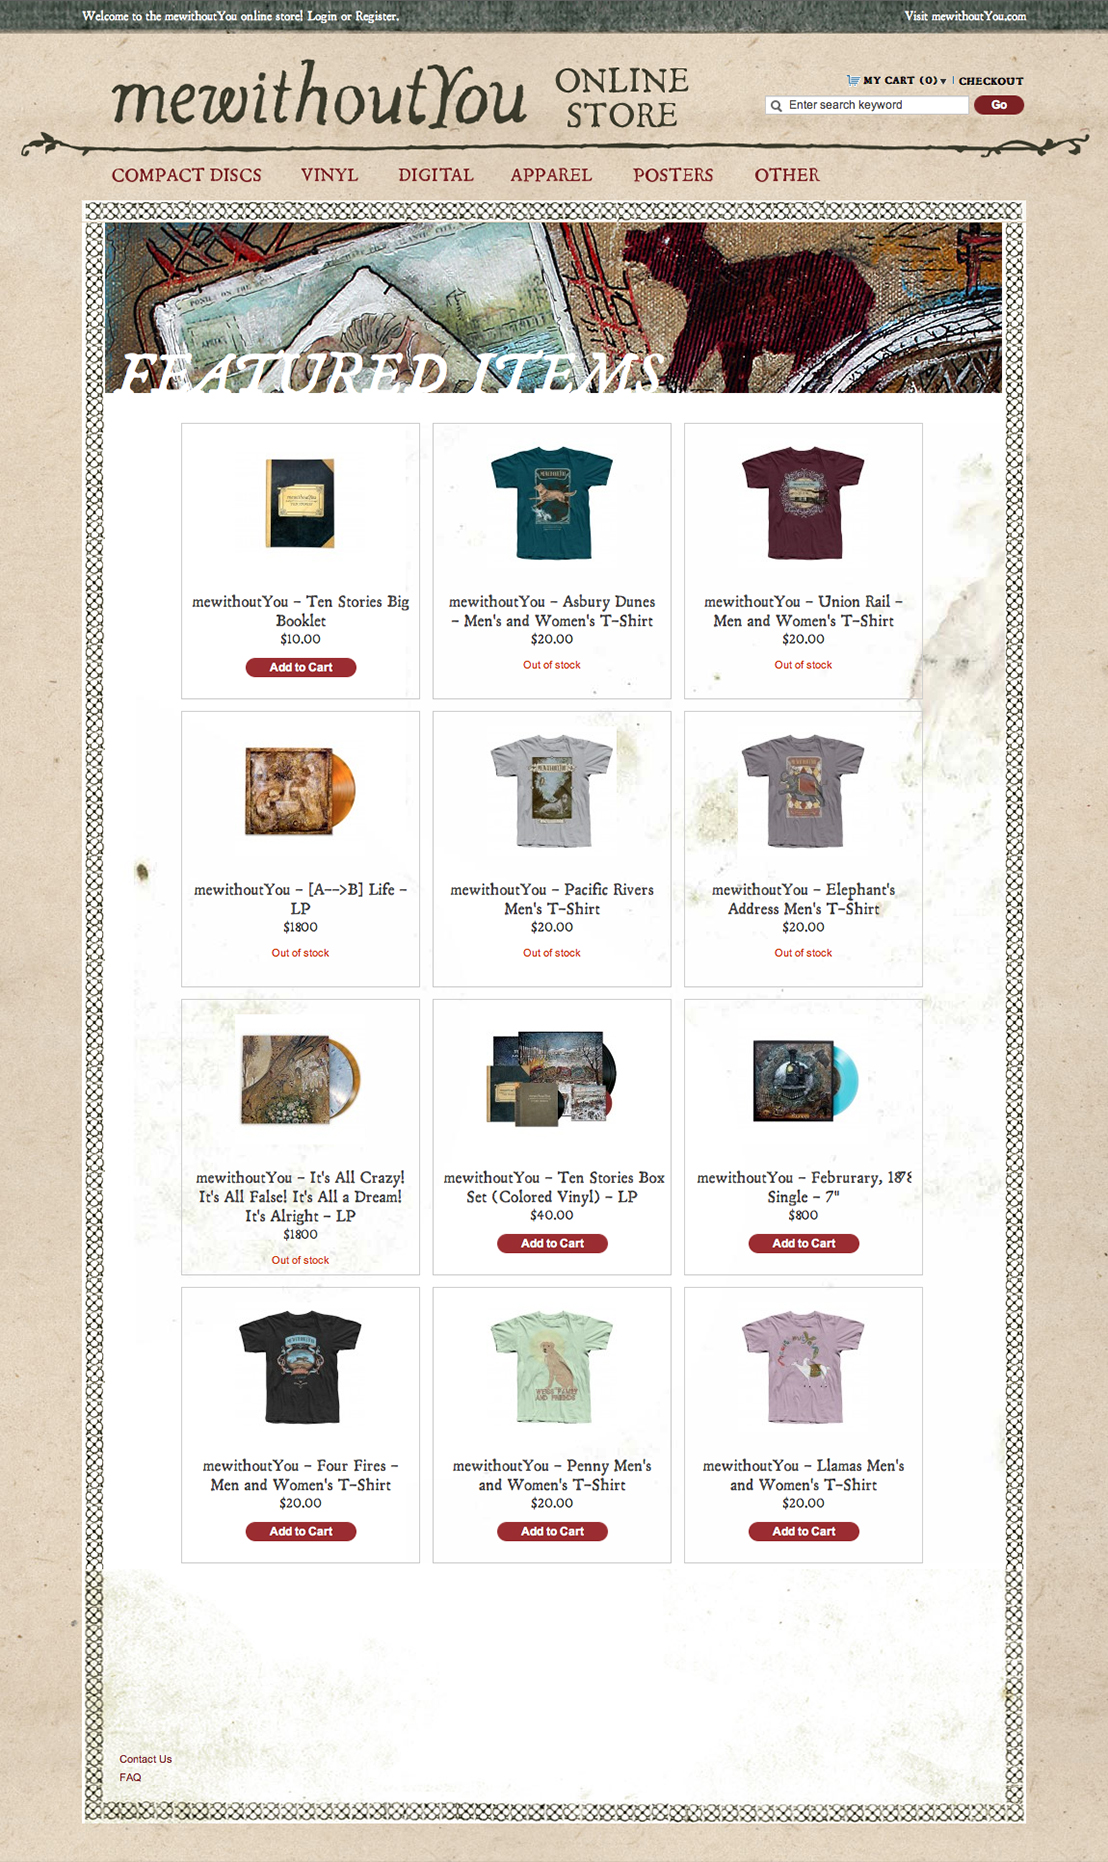 mewithoutYou Online Store